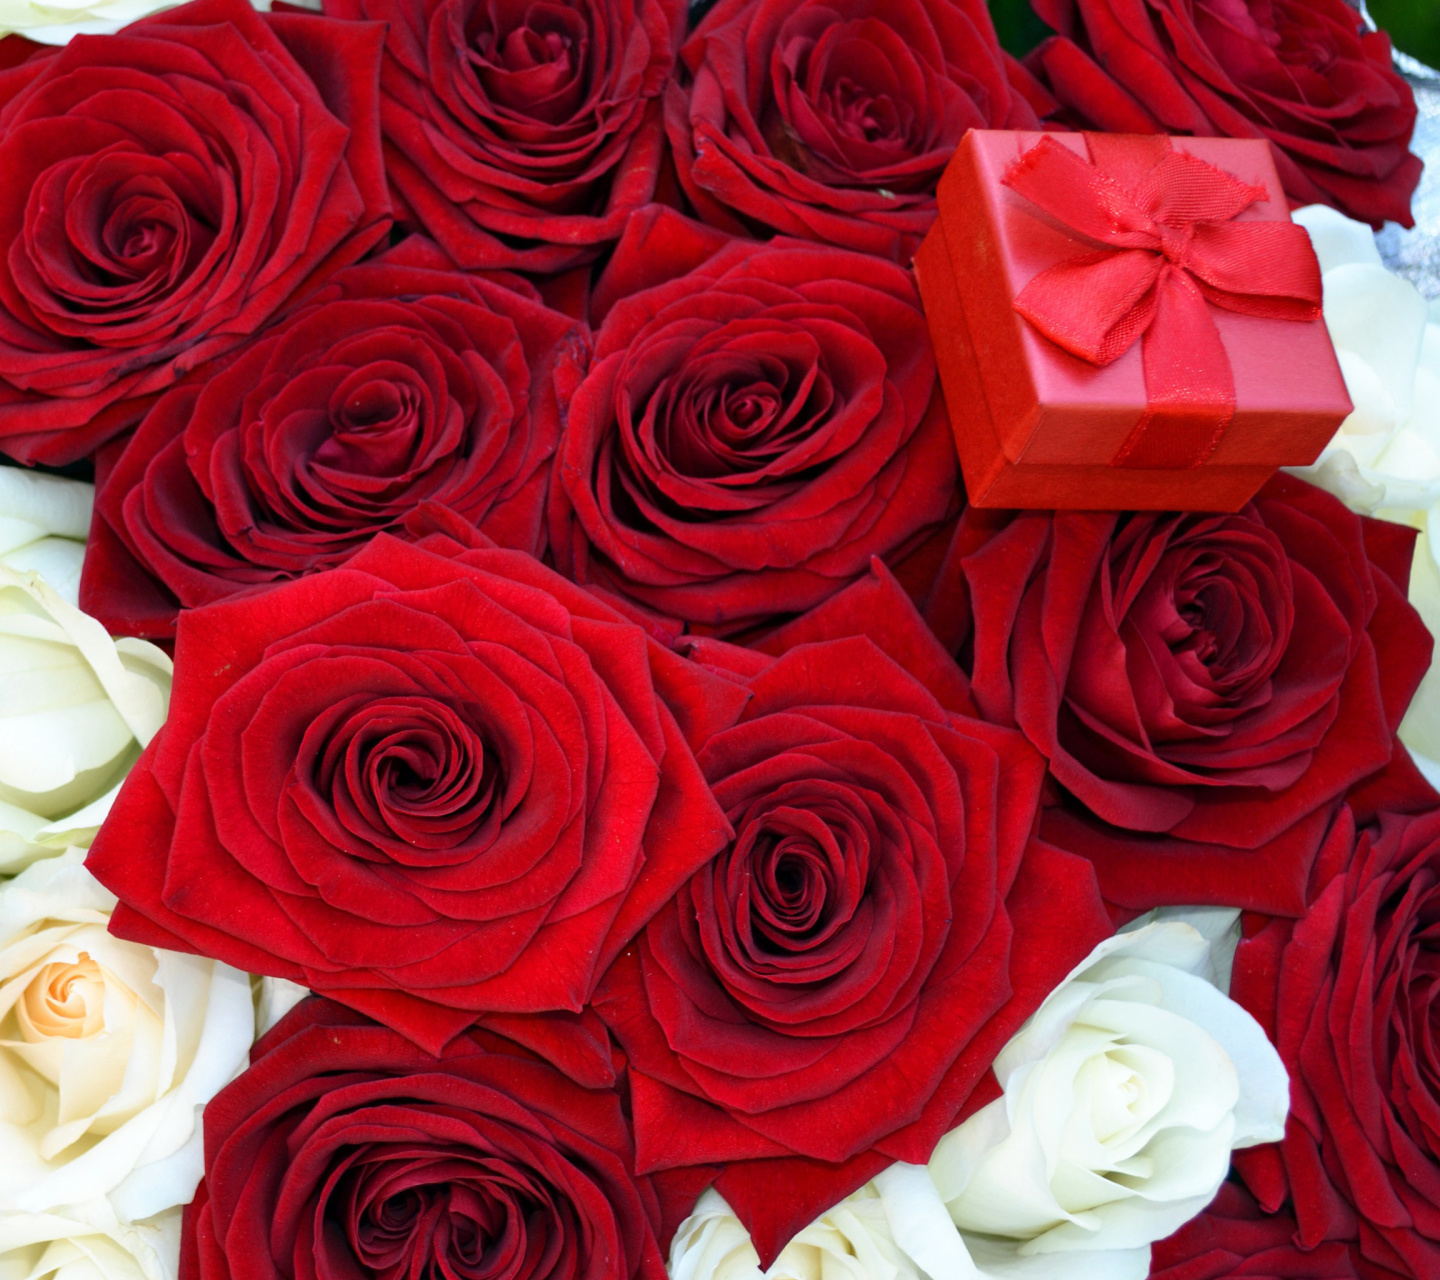 Roses for Propose wallpaper 1440x1280